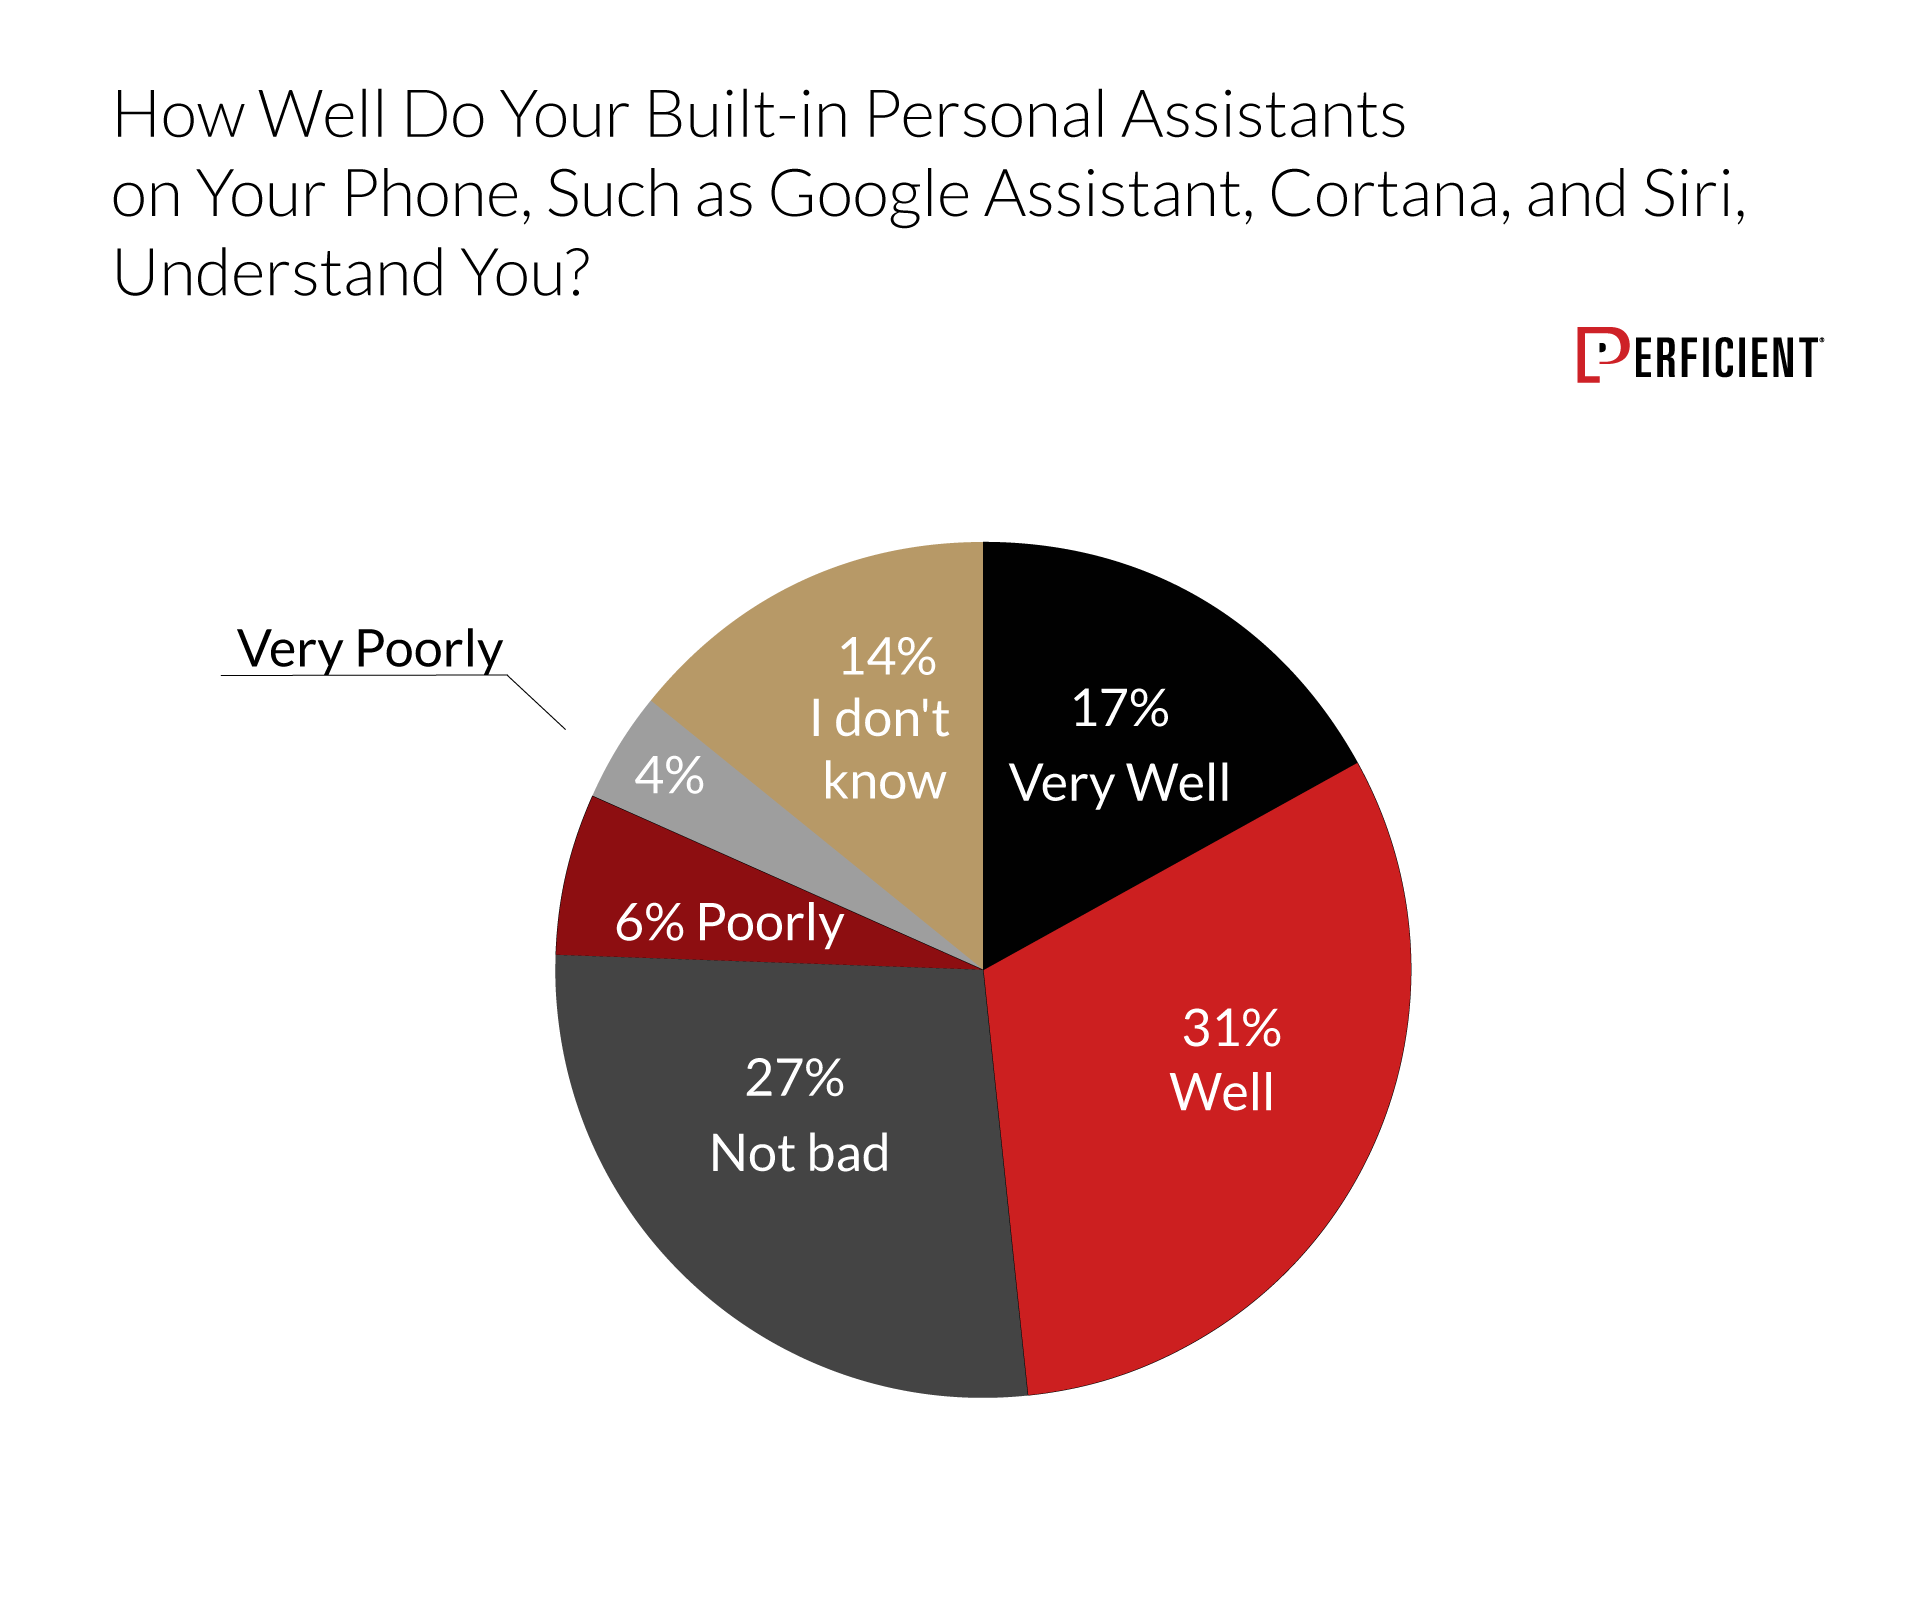 Chart shows how well users think their built-in personal assistants on their phones, such as Google Assistant, Cortana, and Siri, understand them